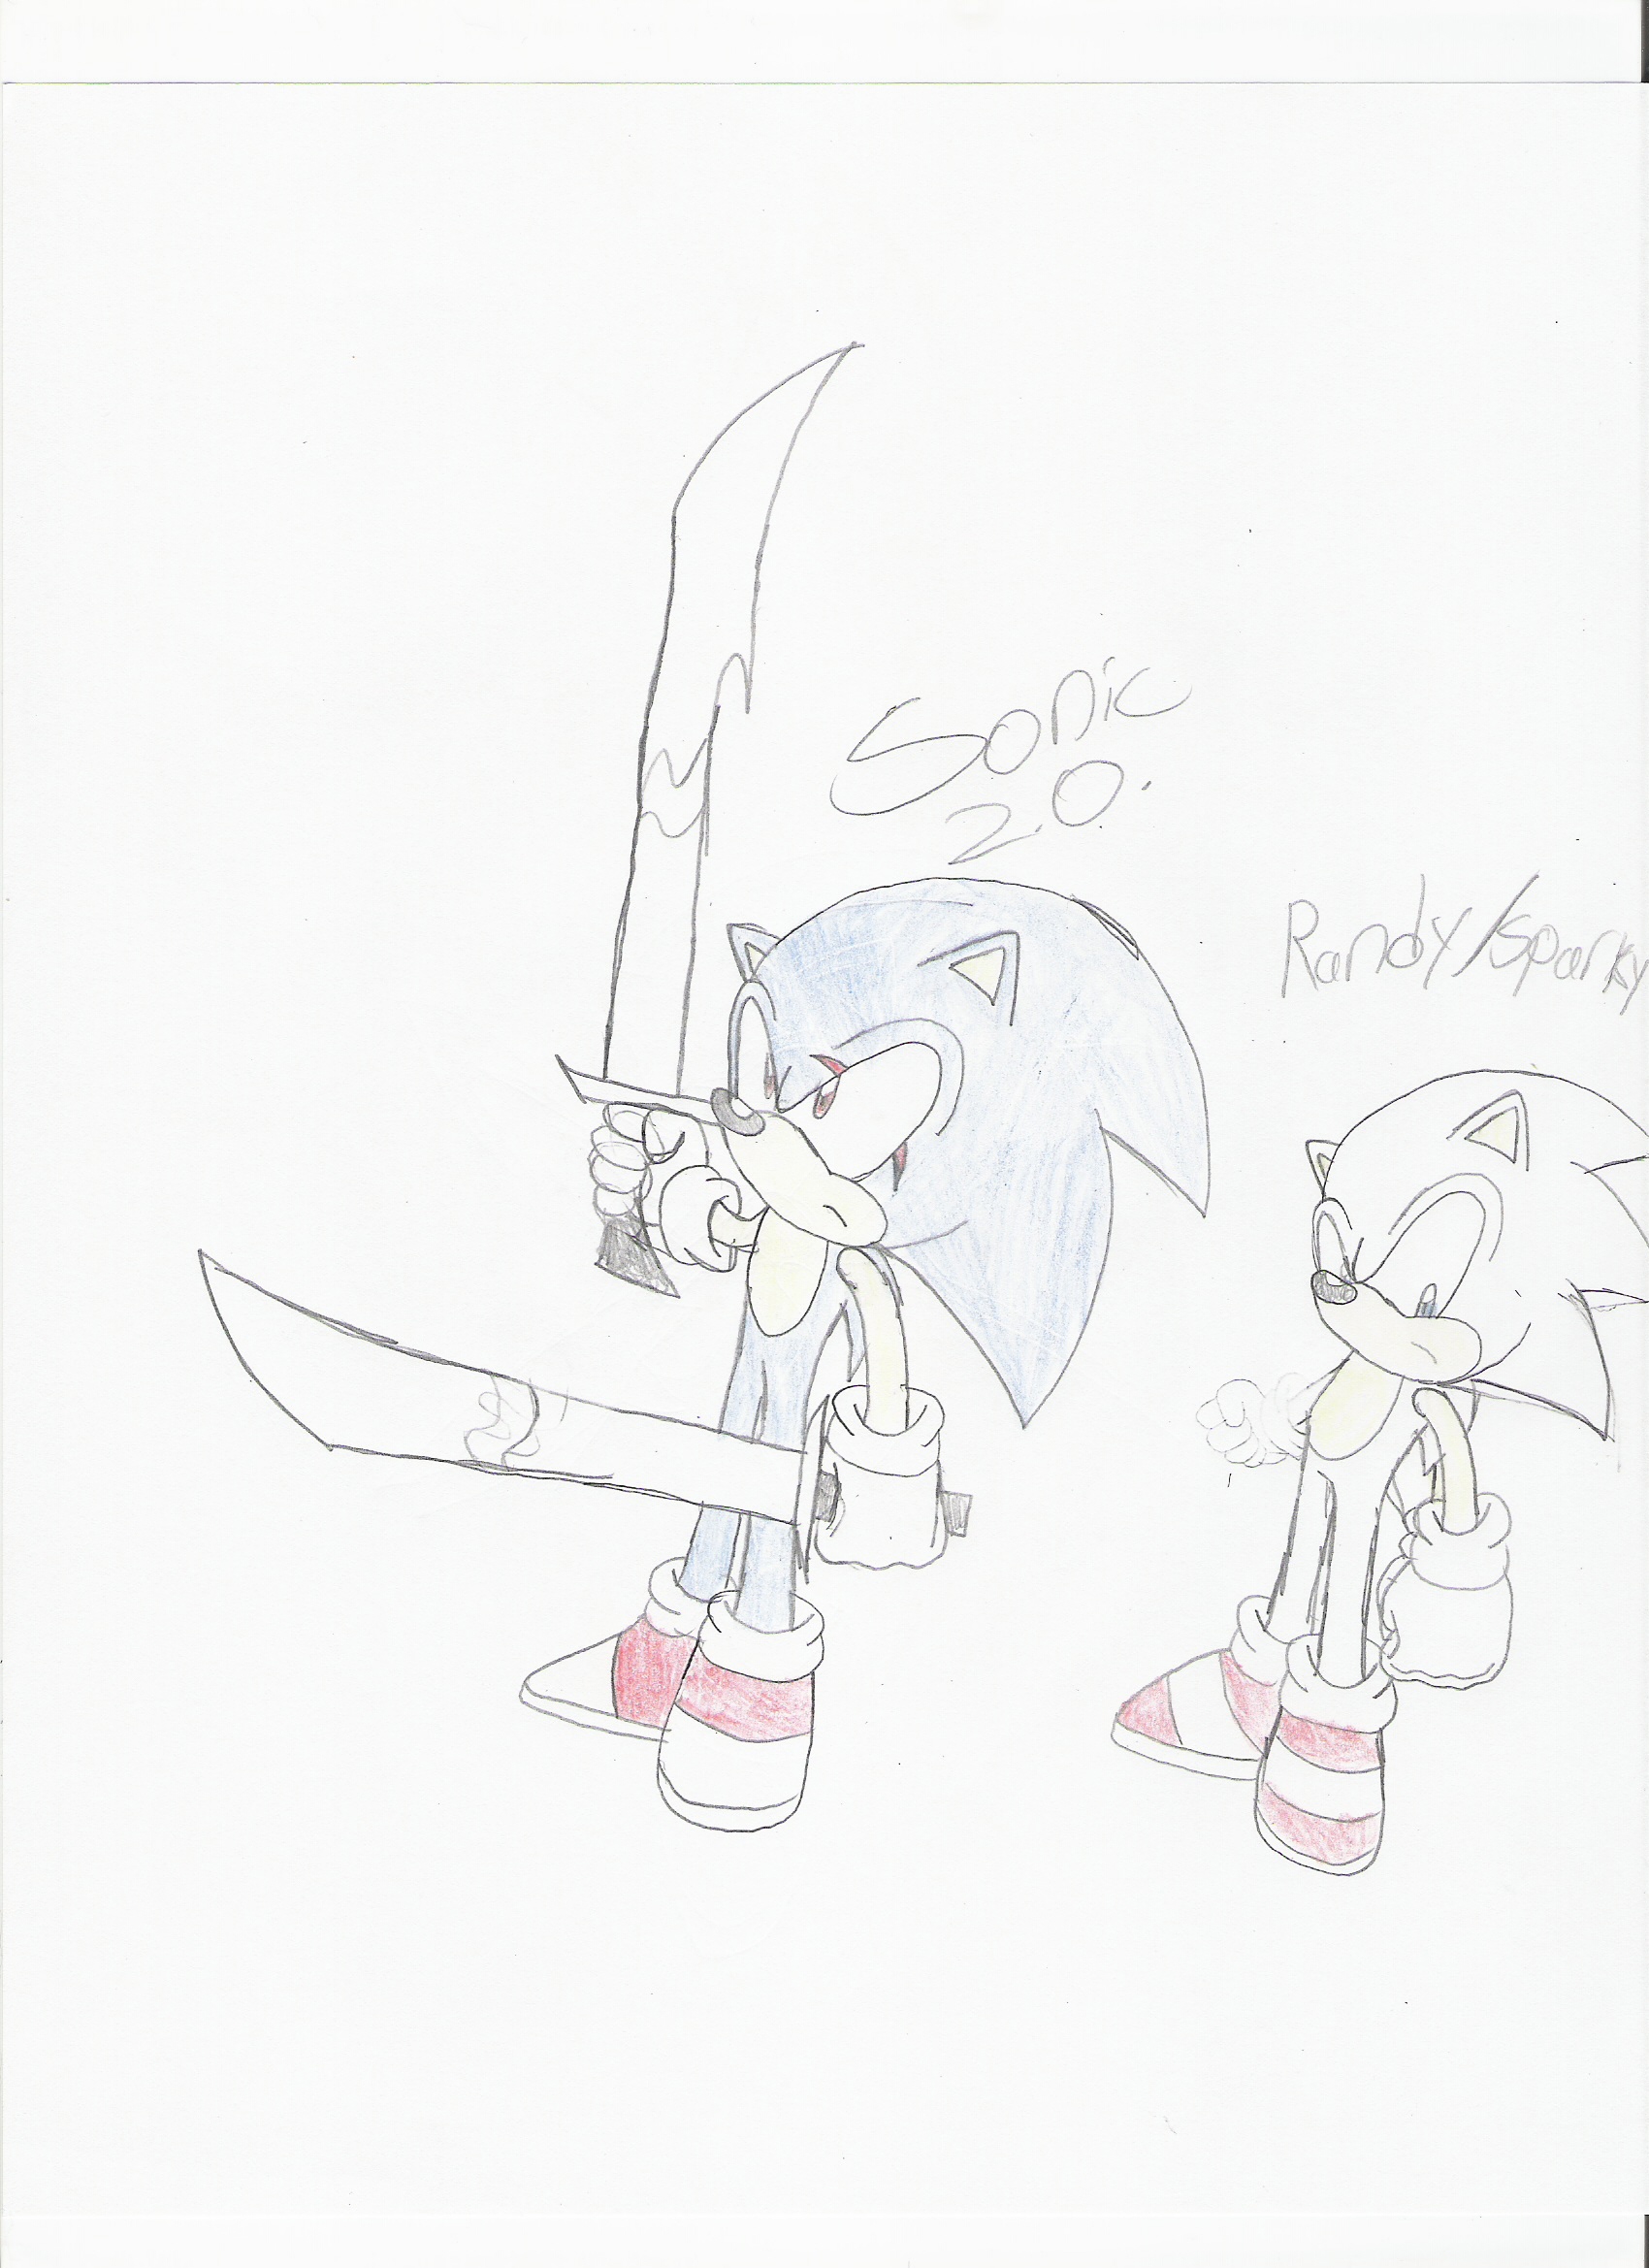 Sonic 2.0. and Sparky by Marluxia1445679011